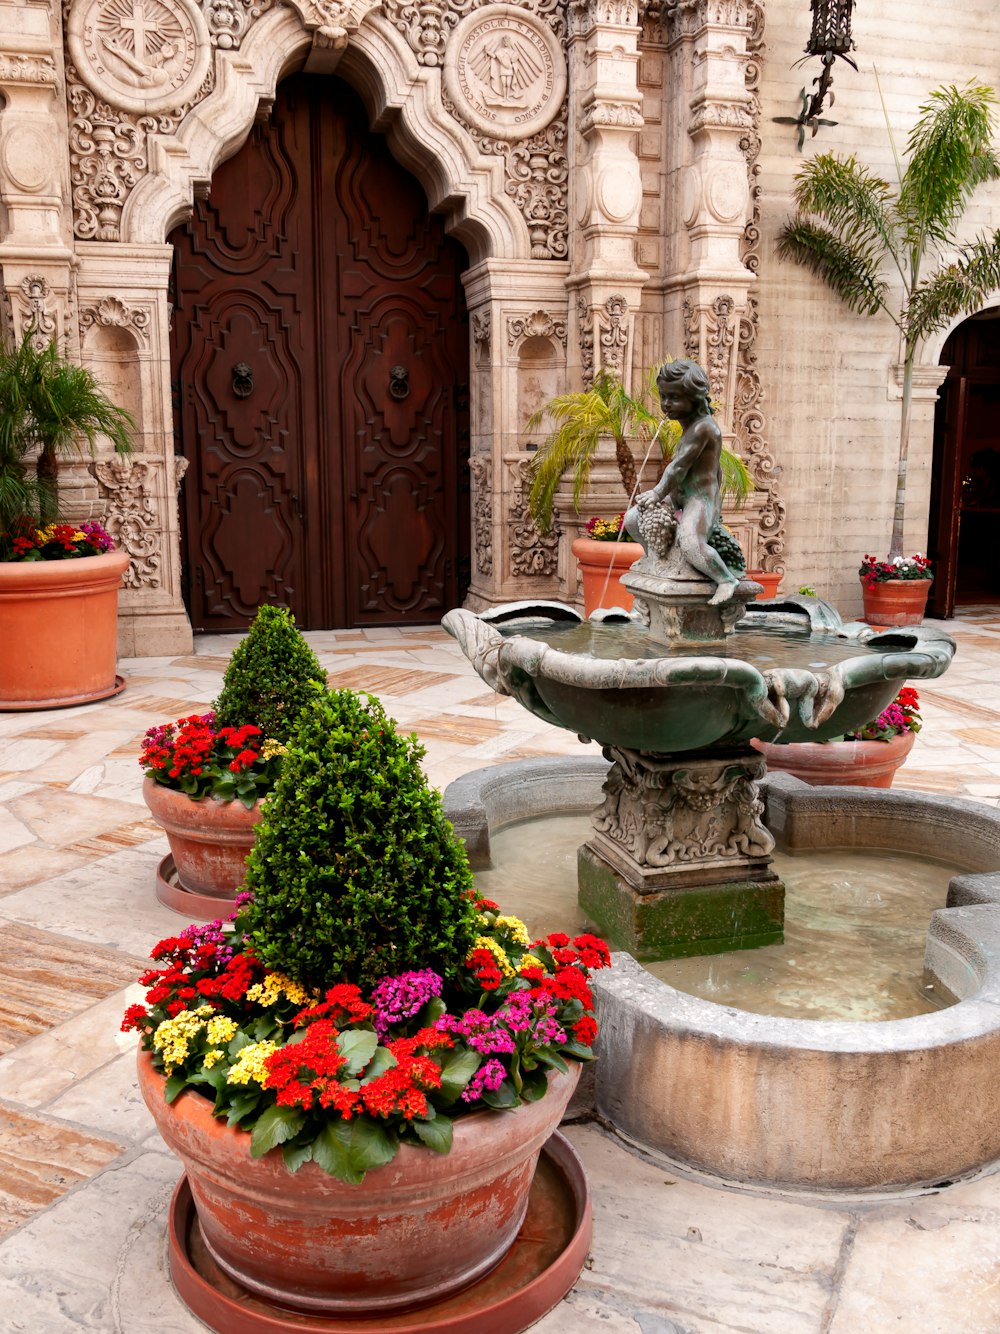 a fountain with flowers and a statue in the middle